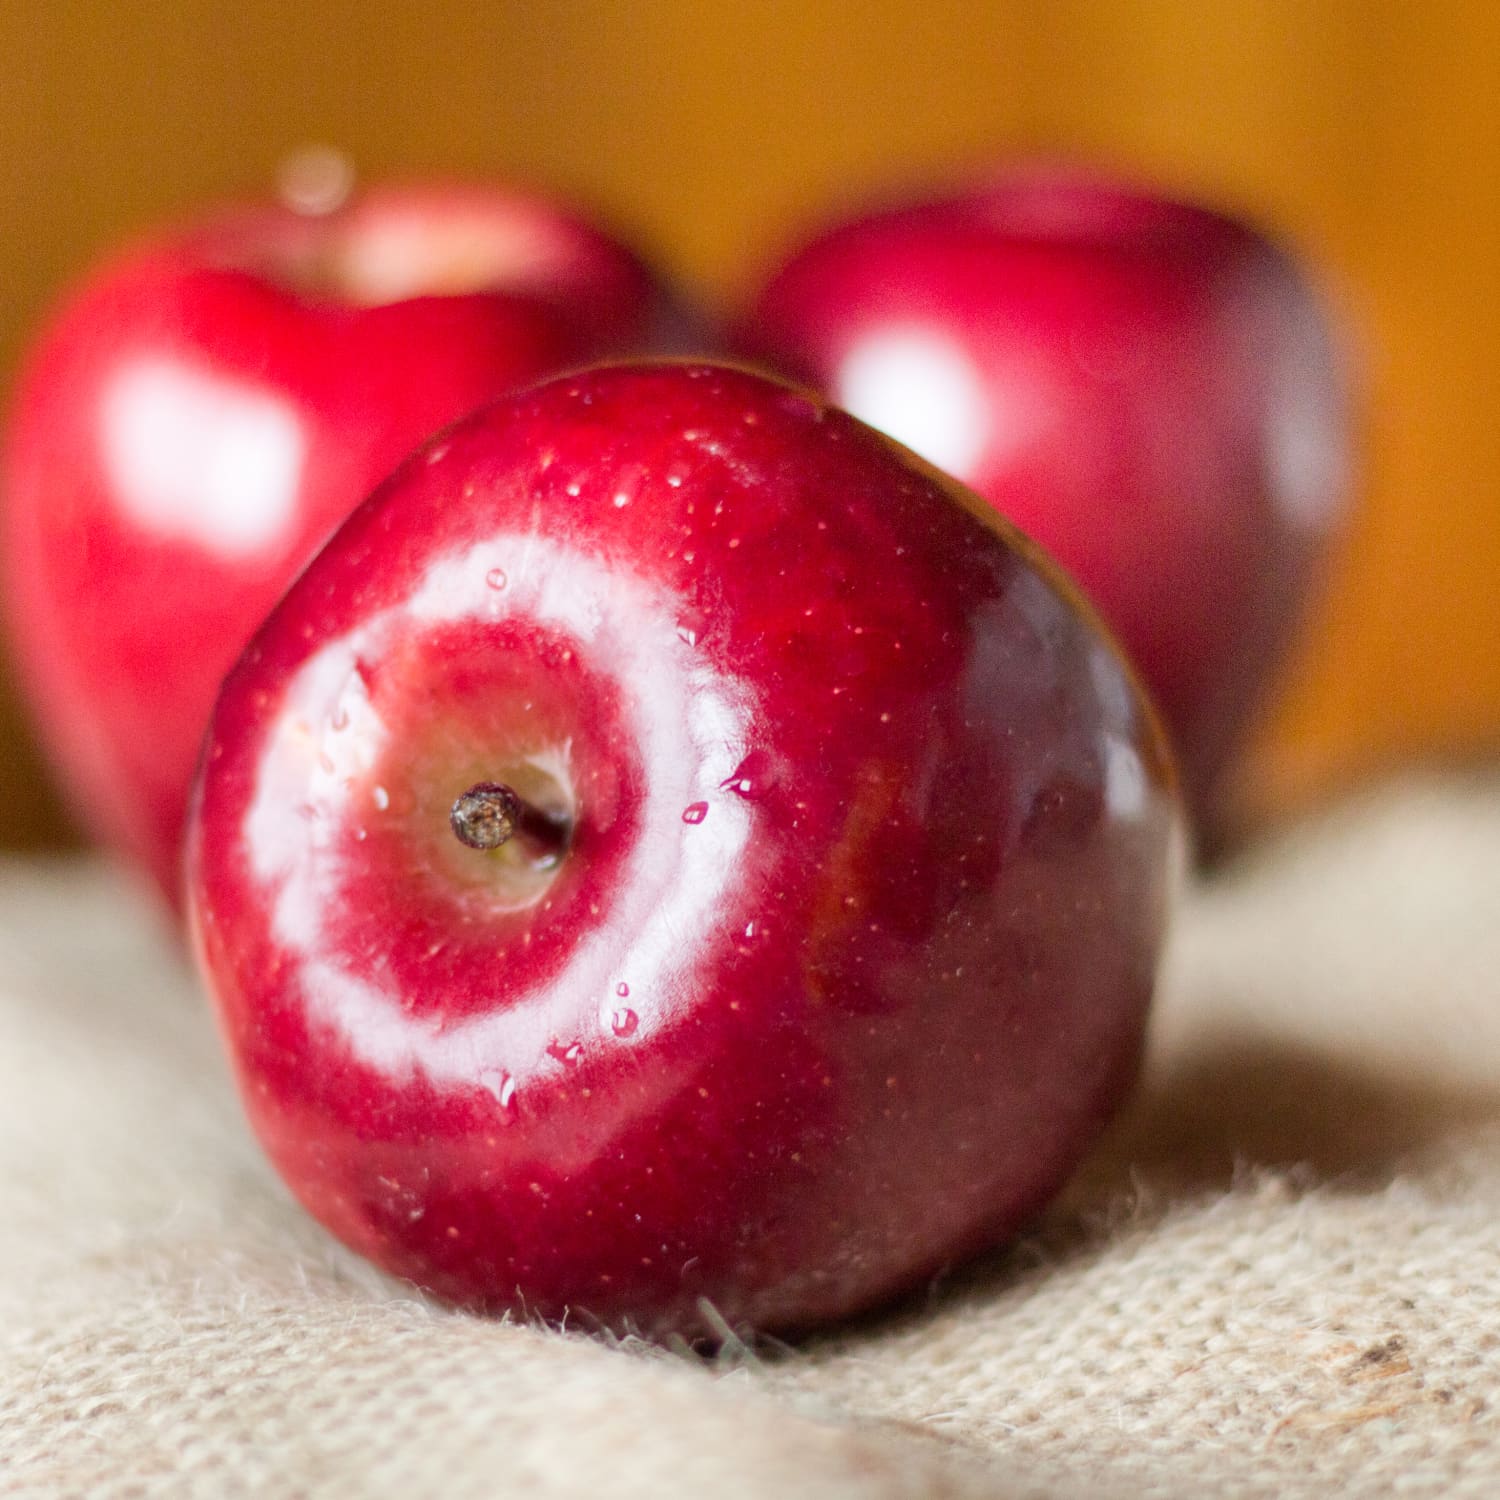 Red Delicious Apples Have Finally Been Dethroned